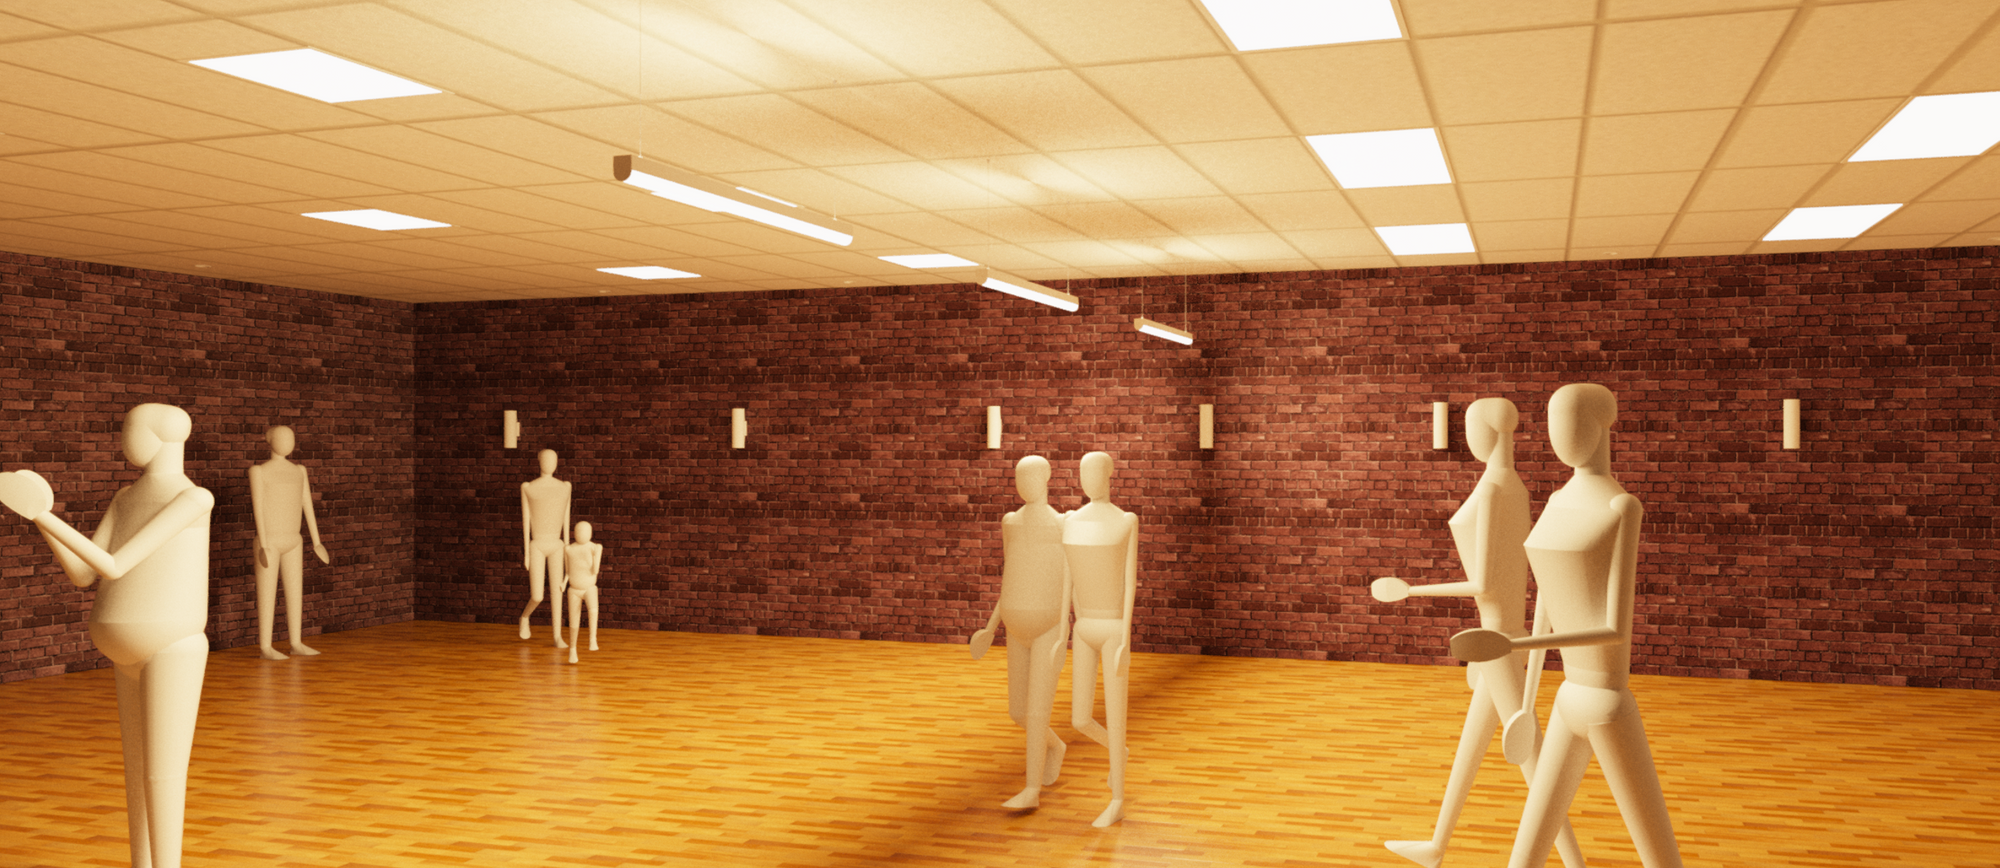 image showing rendered interior scene from Revit.